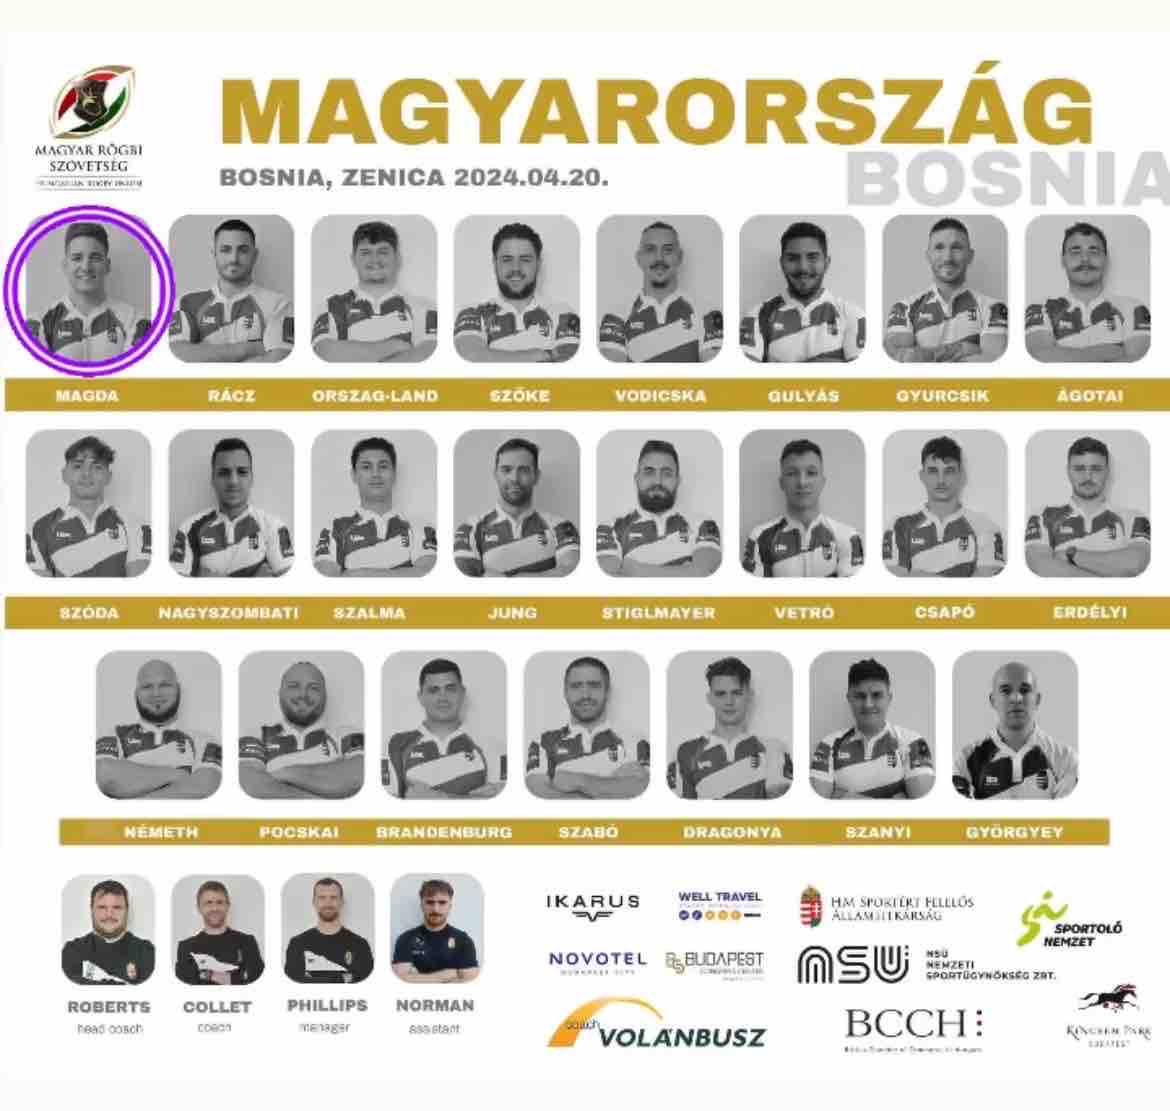 Good luck to Worthing Raiders player Balazs Magda who is starting at Looshead today for Hungary against Bosnia